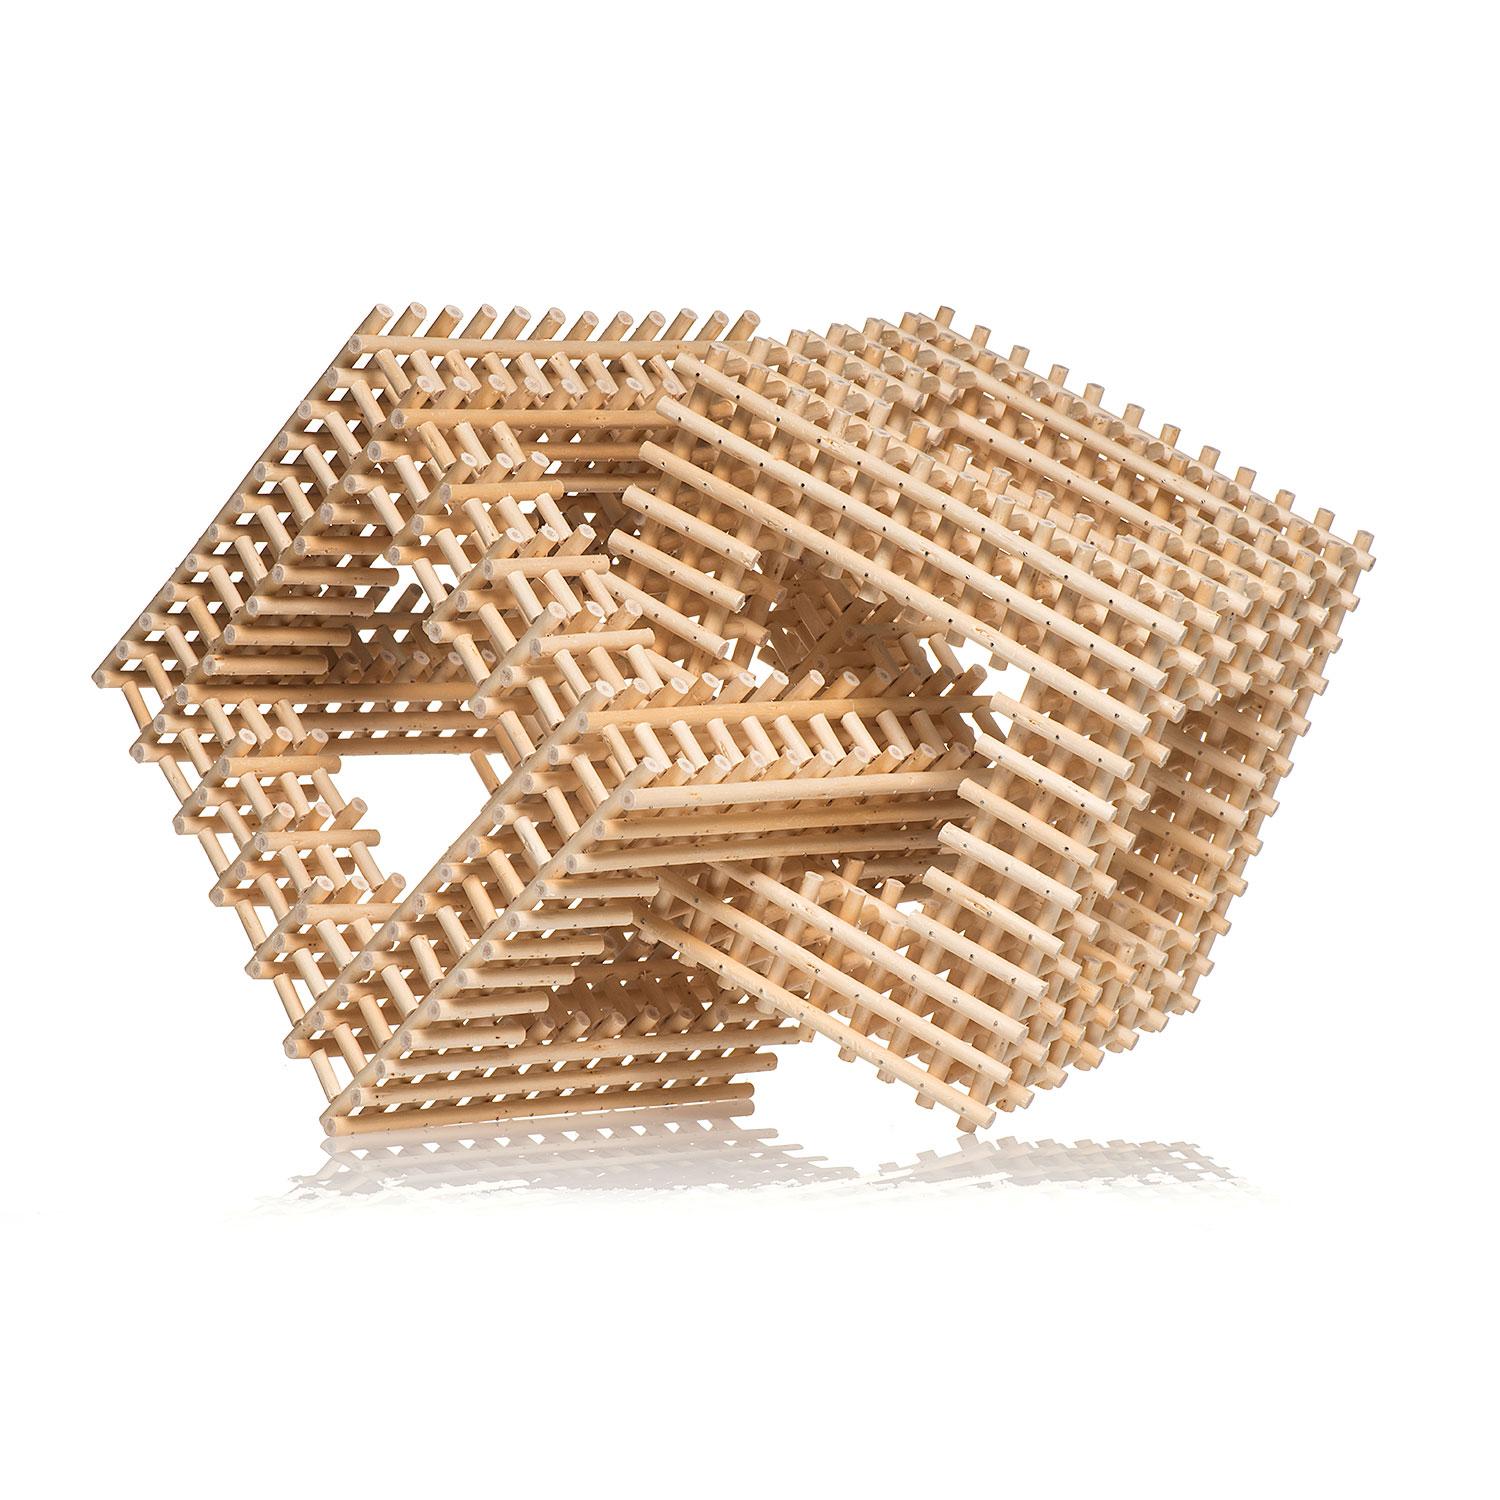 Intersecting Cubes, Dail Behennah, Abstract Geometric Willow Sculpture